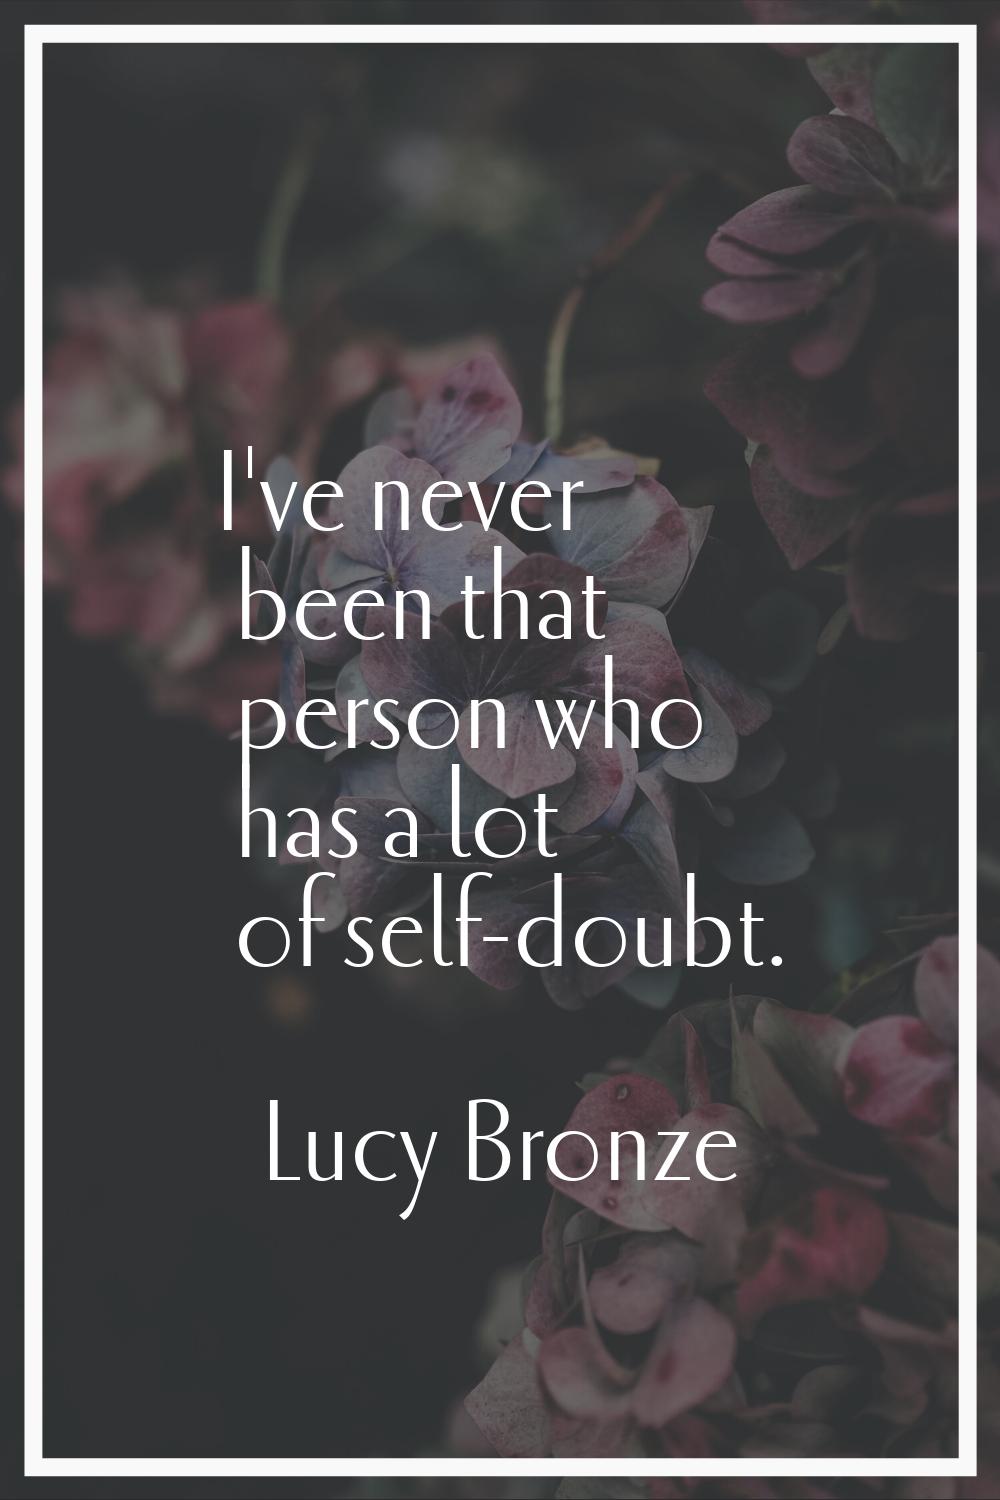 I've never been that person who has a lot of self-doubt.